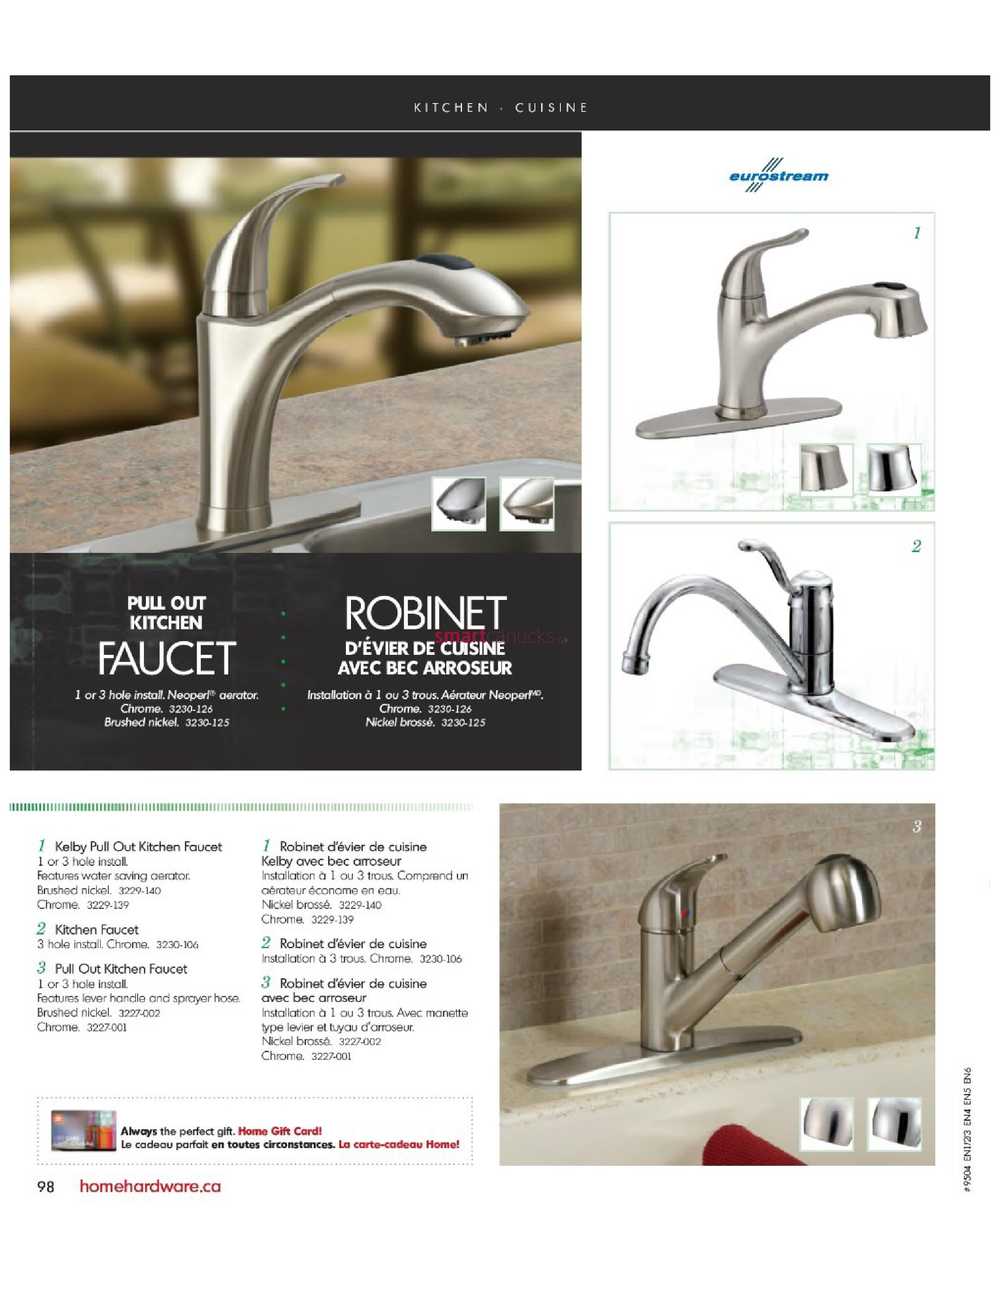 Eurostream Pull Out Kitchen Faucet